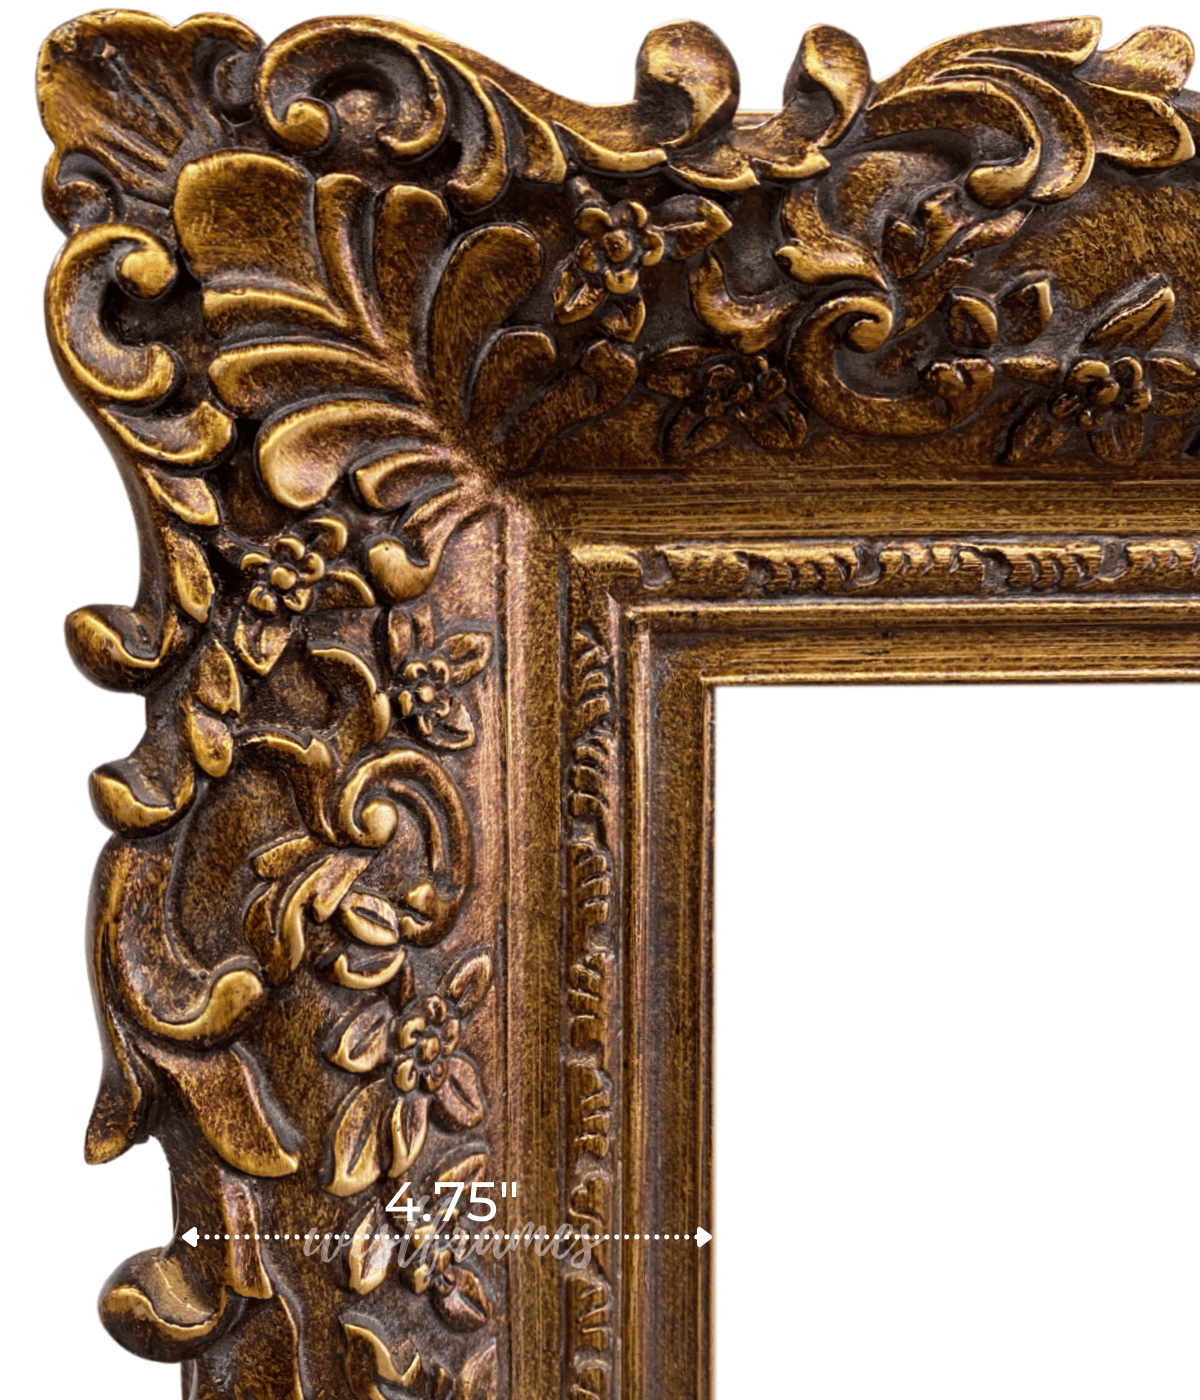 20x24 Gold Frames, Large Ornate Baroque Picture Frame, Classic